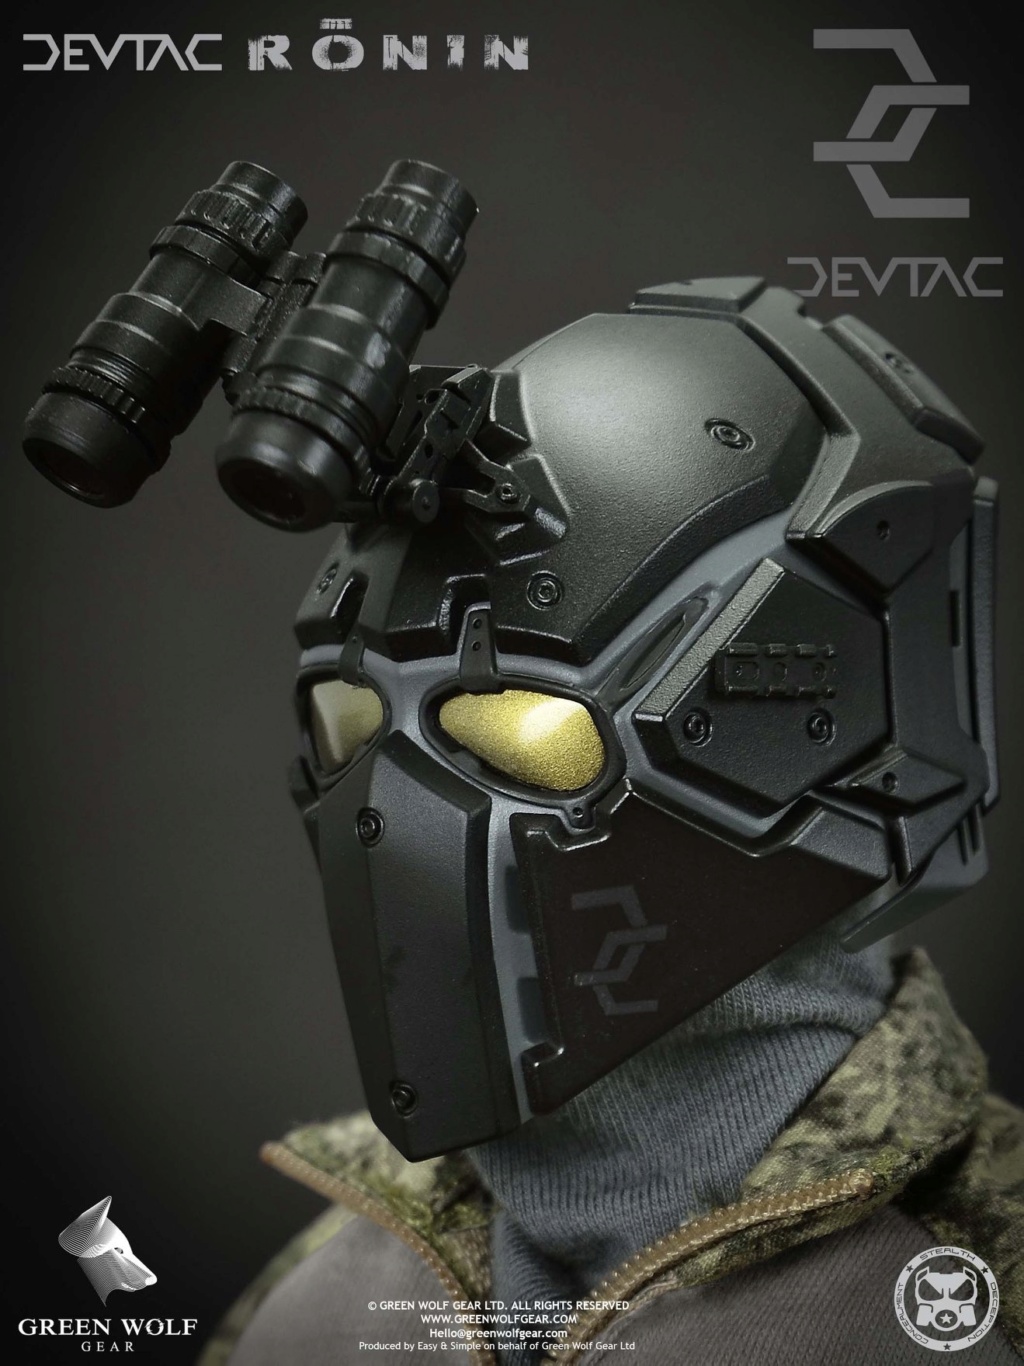 ModernMilitary - NEW PRODUCT: Green Wolf Gear DEVTAC Ronin 1/6 Action Figure (VS2434P) 1340